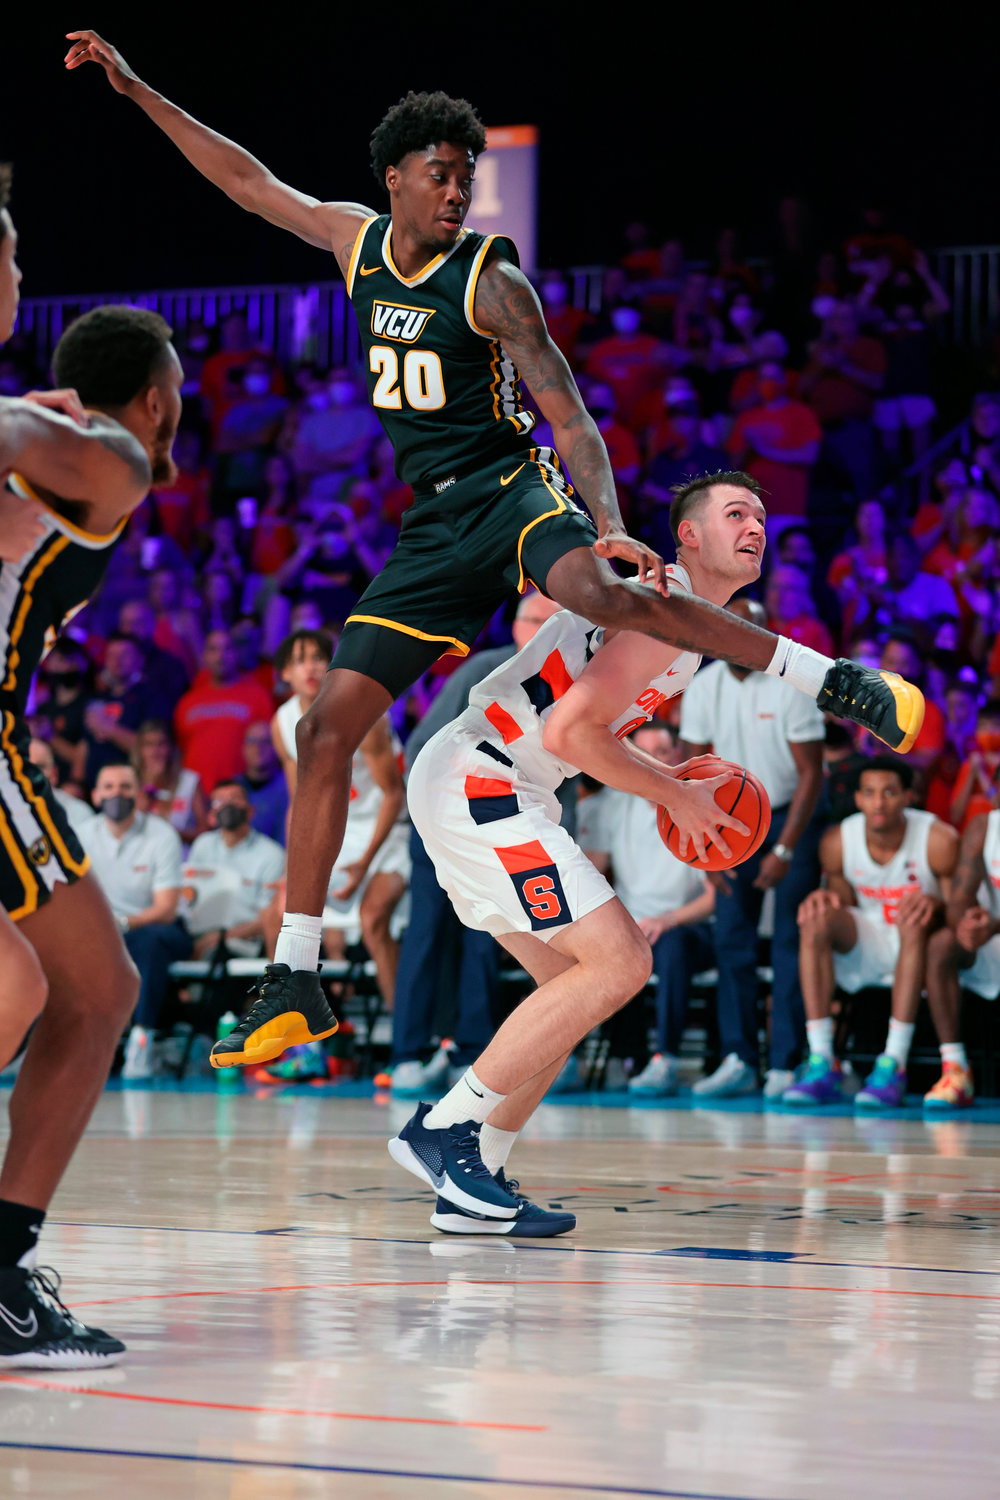 LOOKING FOR A SHOT — In a photo provided by Bahamas Visual Services, Syracuse forward Jimmy Boeheim (0) goes up for the shot as Virginia Commonwealth forward Hason Ward (20) defends during an NCAA college basketball game at Paradise Island, Bahamas, Wednesday, Nov. 24. VCU defeated Syracuse, 67-55.